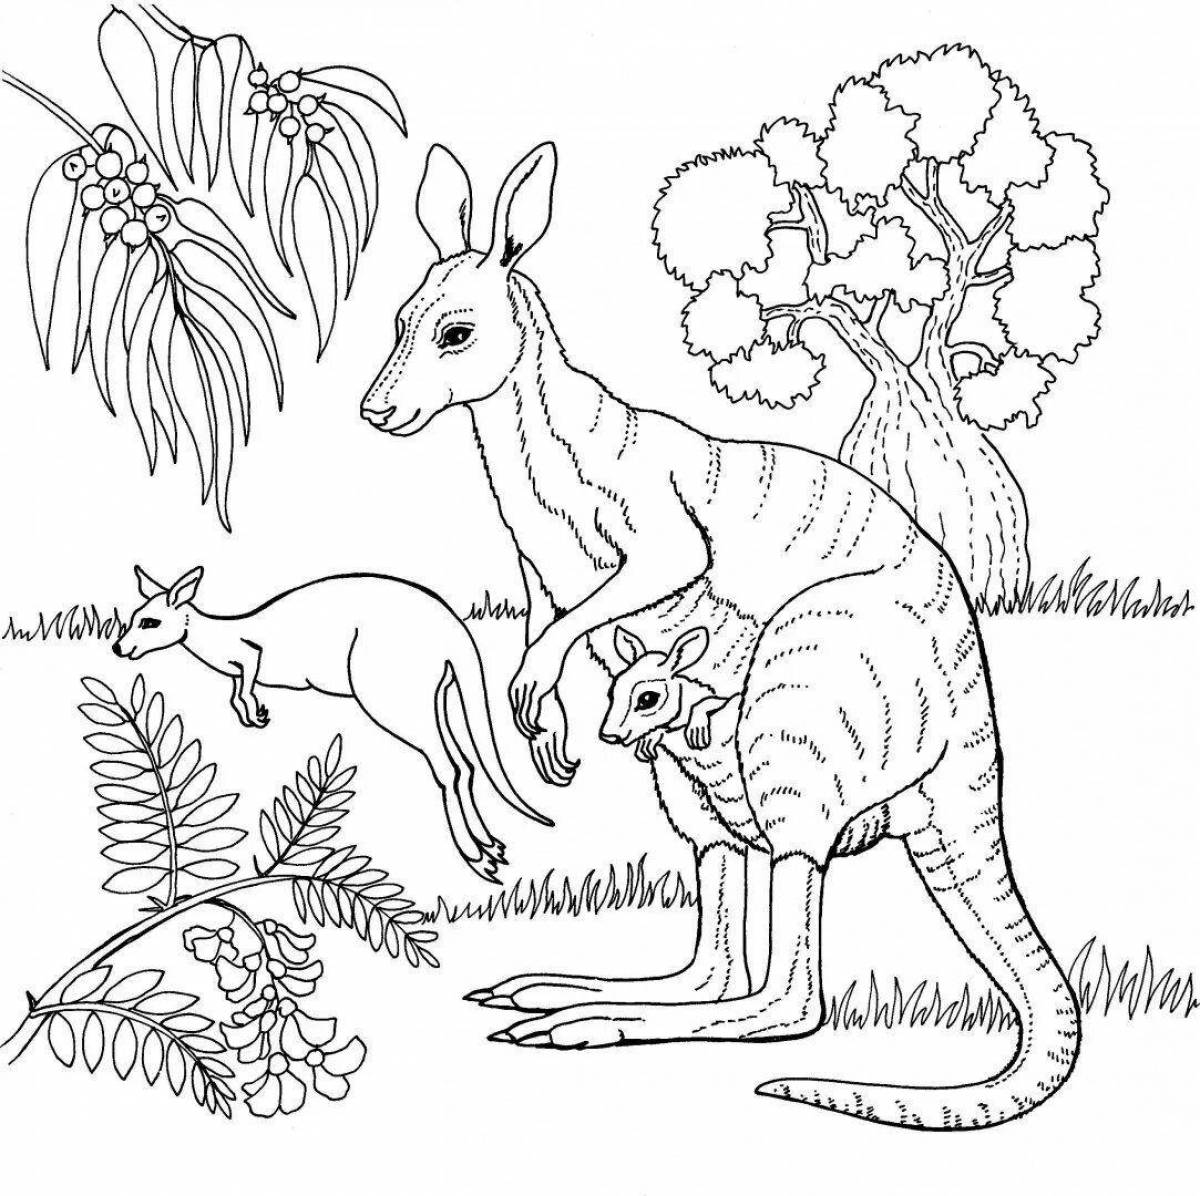 Coloring pages of wild animals